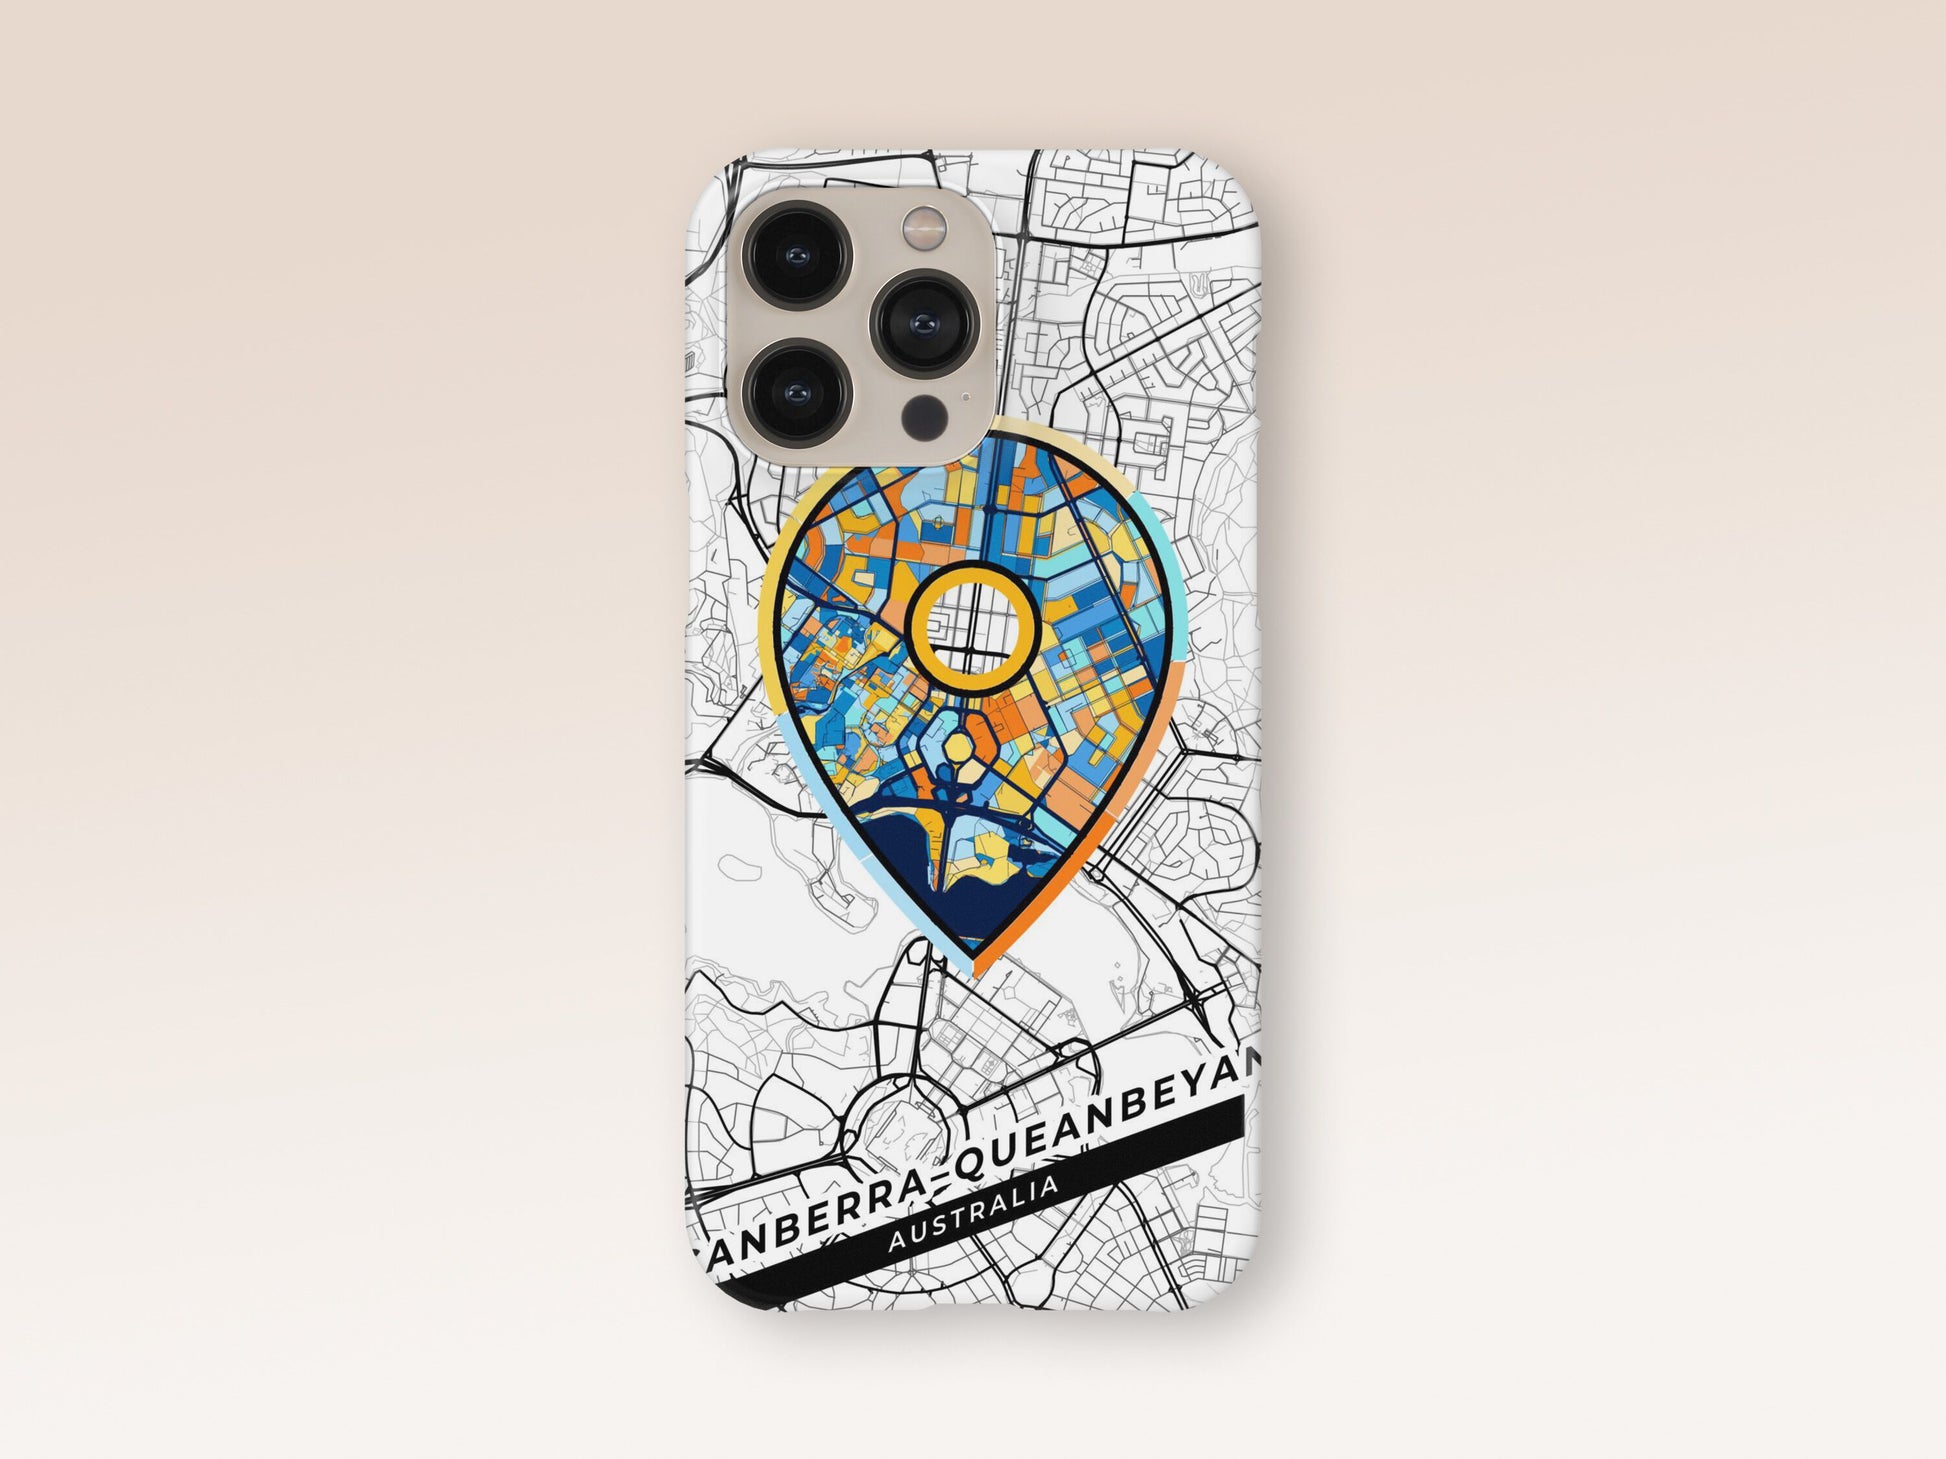 Canberra–Queanbeyan Australia slim phone case with colorful icon. Birthday, wedding or housewarming gift. Couple match cases. 1